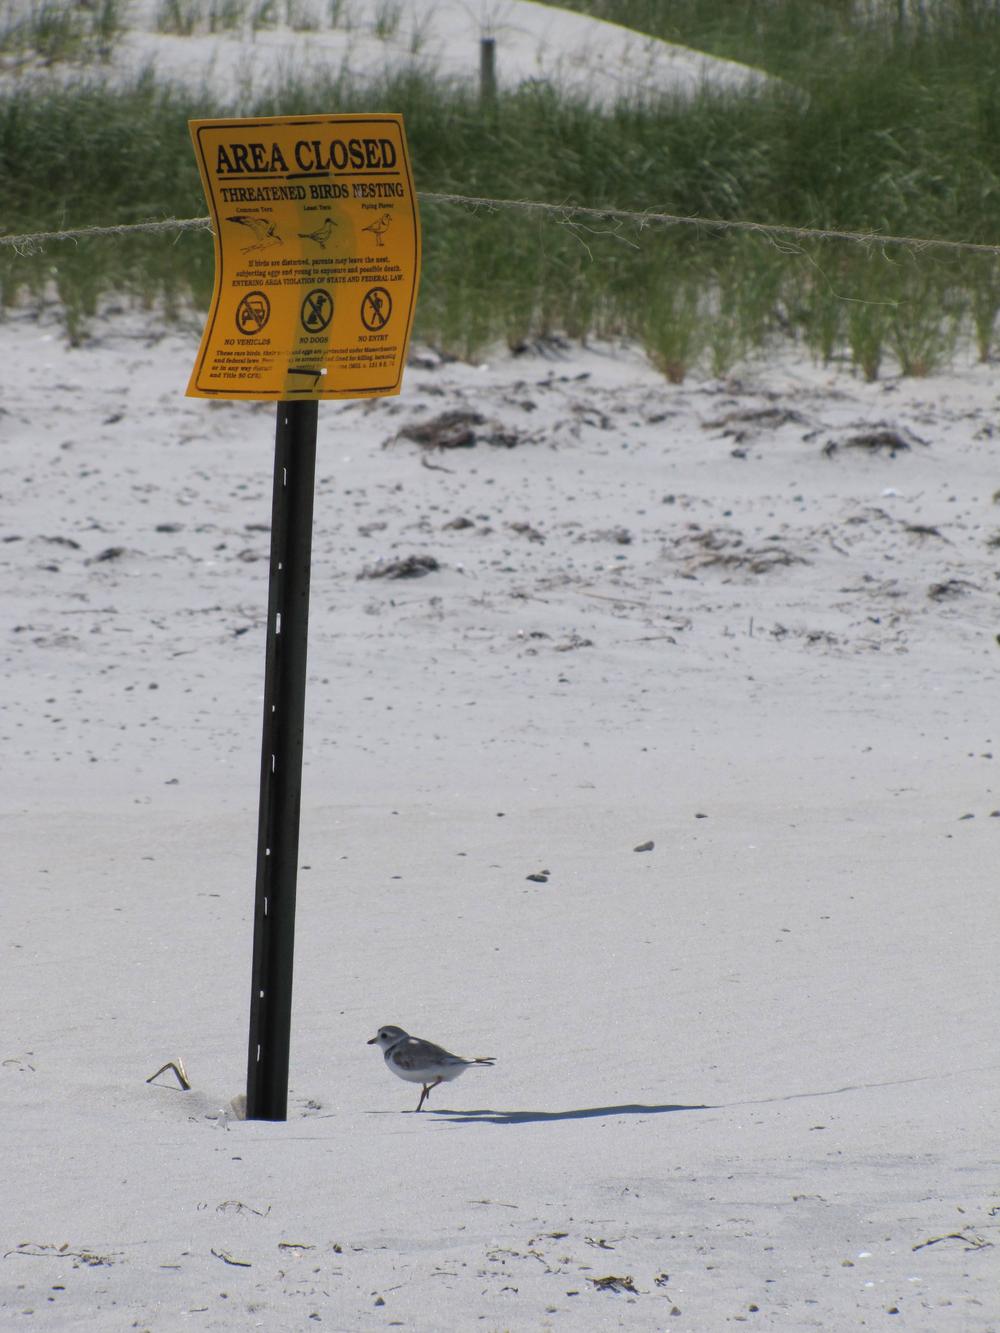 A piping plover is seen next to a sign forbidding beachgoers from driving off-road vehicles near the plovers' nesting grounds. (Courtesy Scott Hecker)